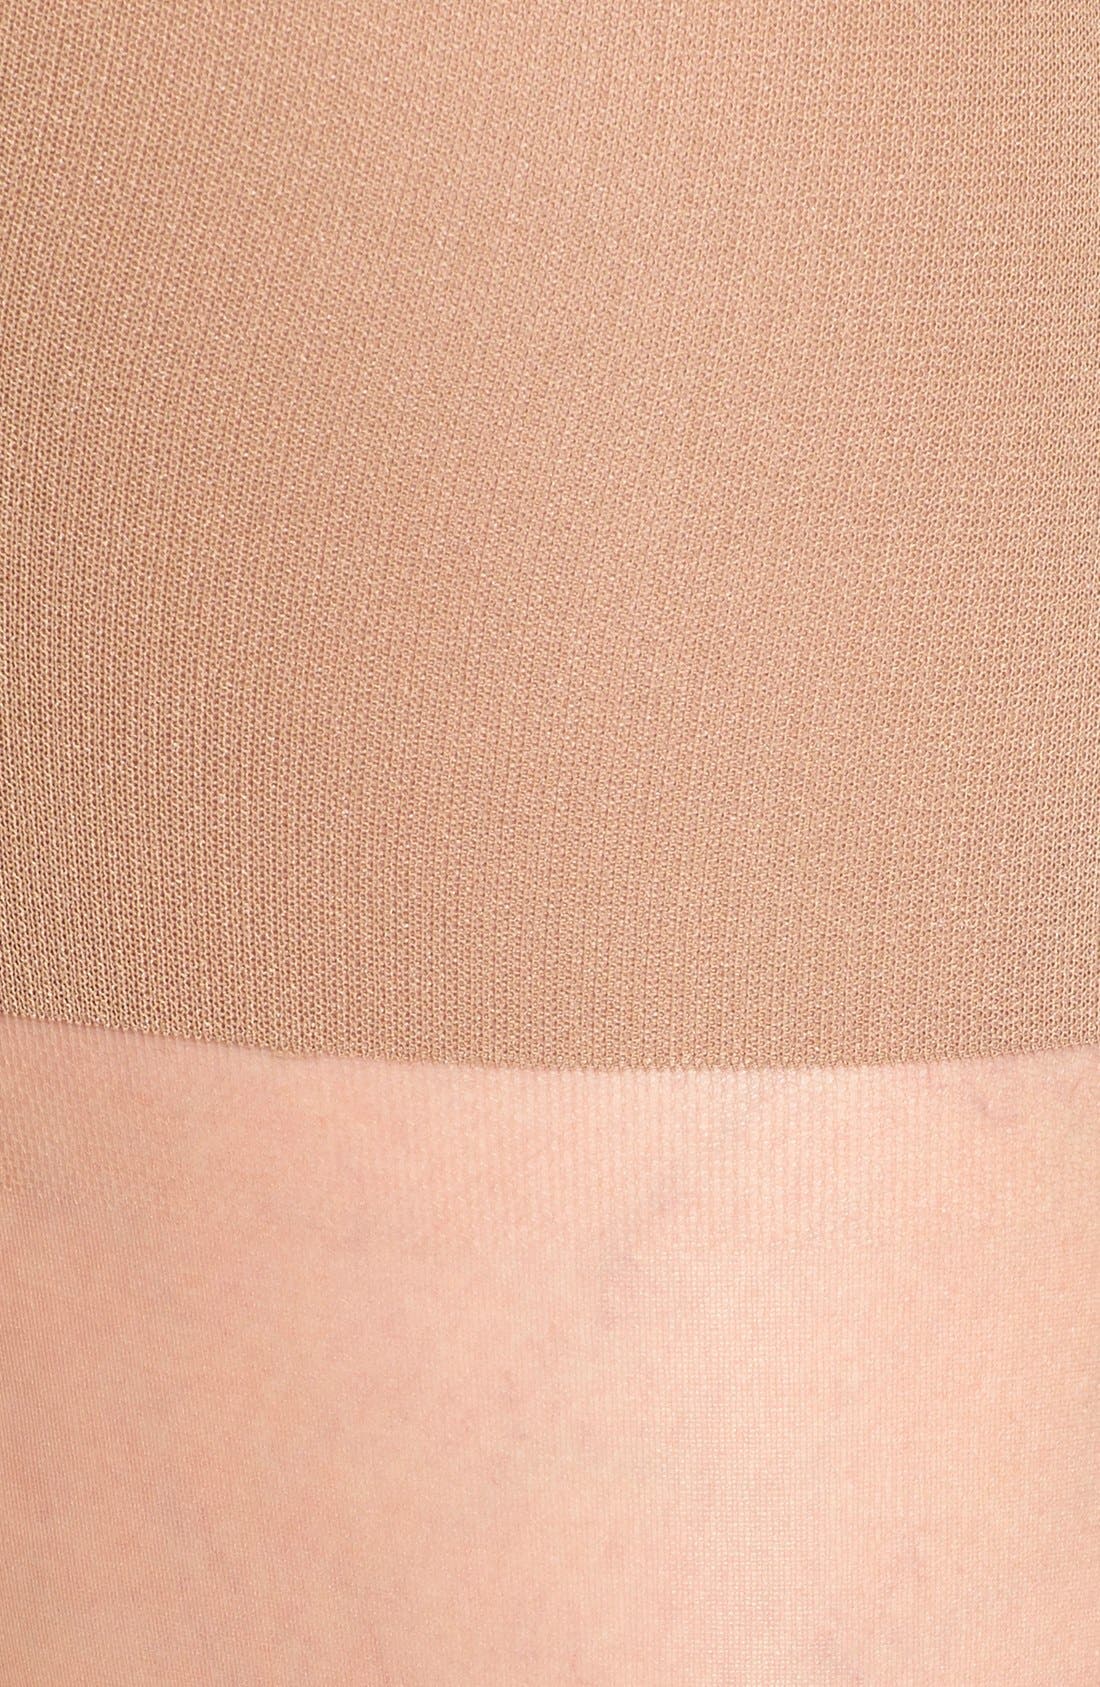 Spanx Luxe Leg Sheers In Nude 4